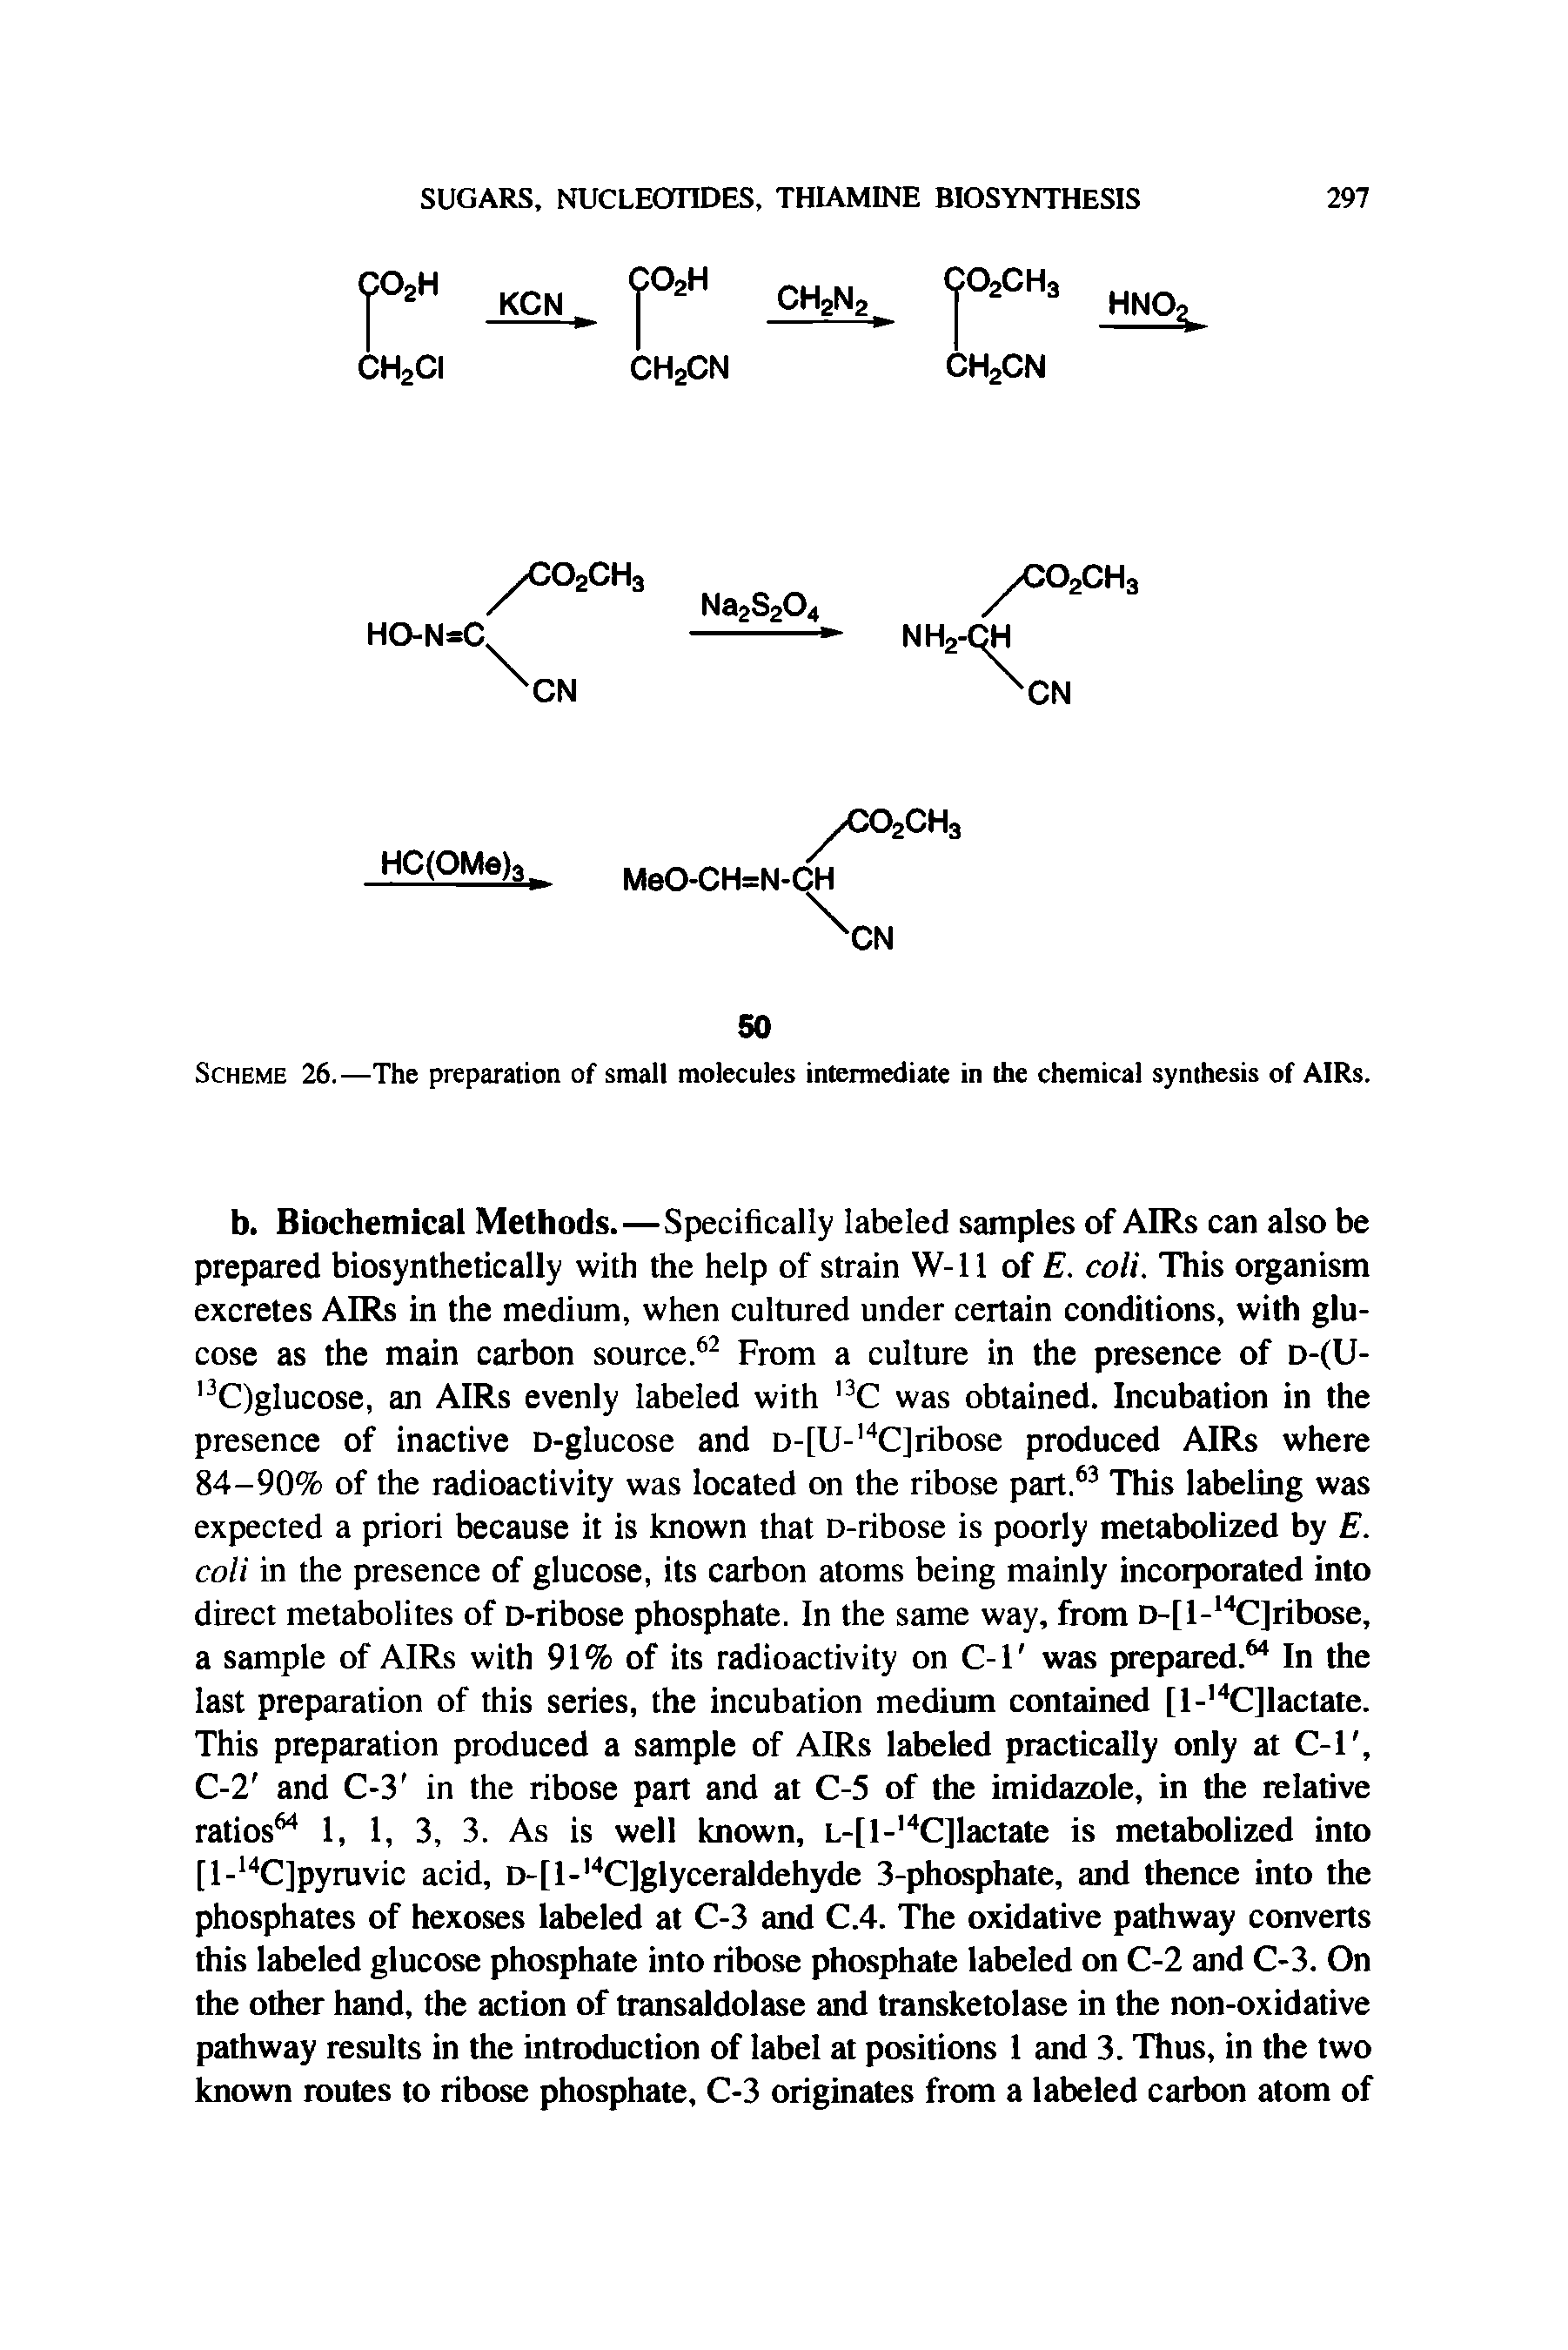 Scheme 26.—The preparation of small molecules intermediate in the chemical synthesis of AIRs.